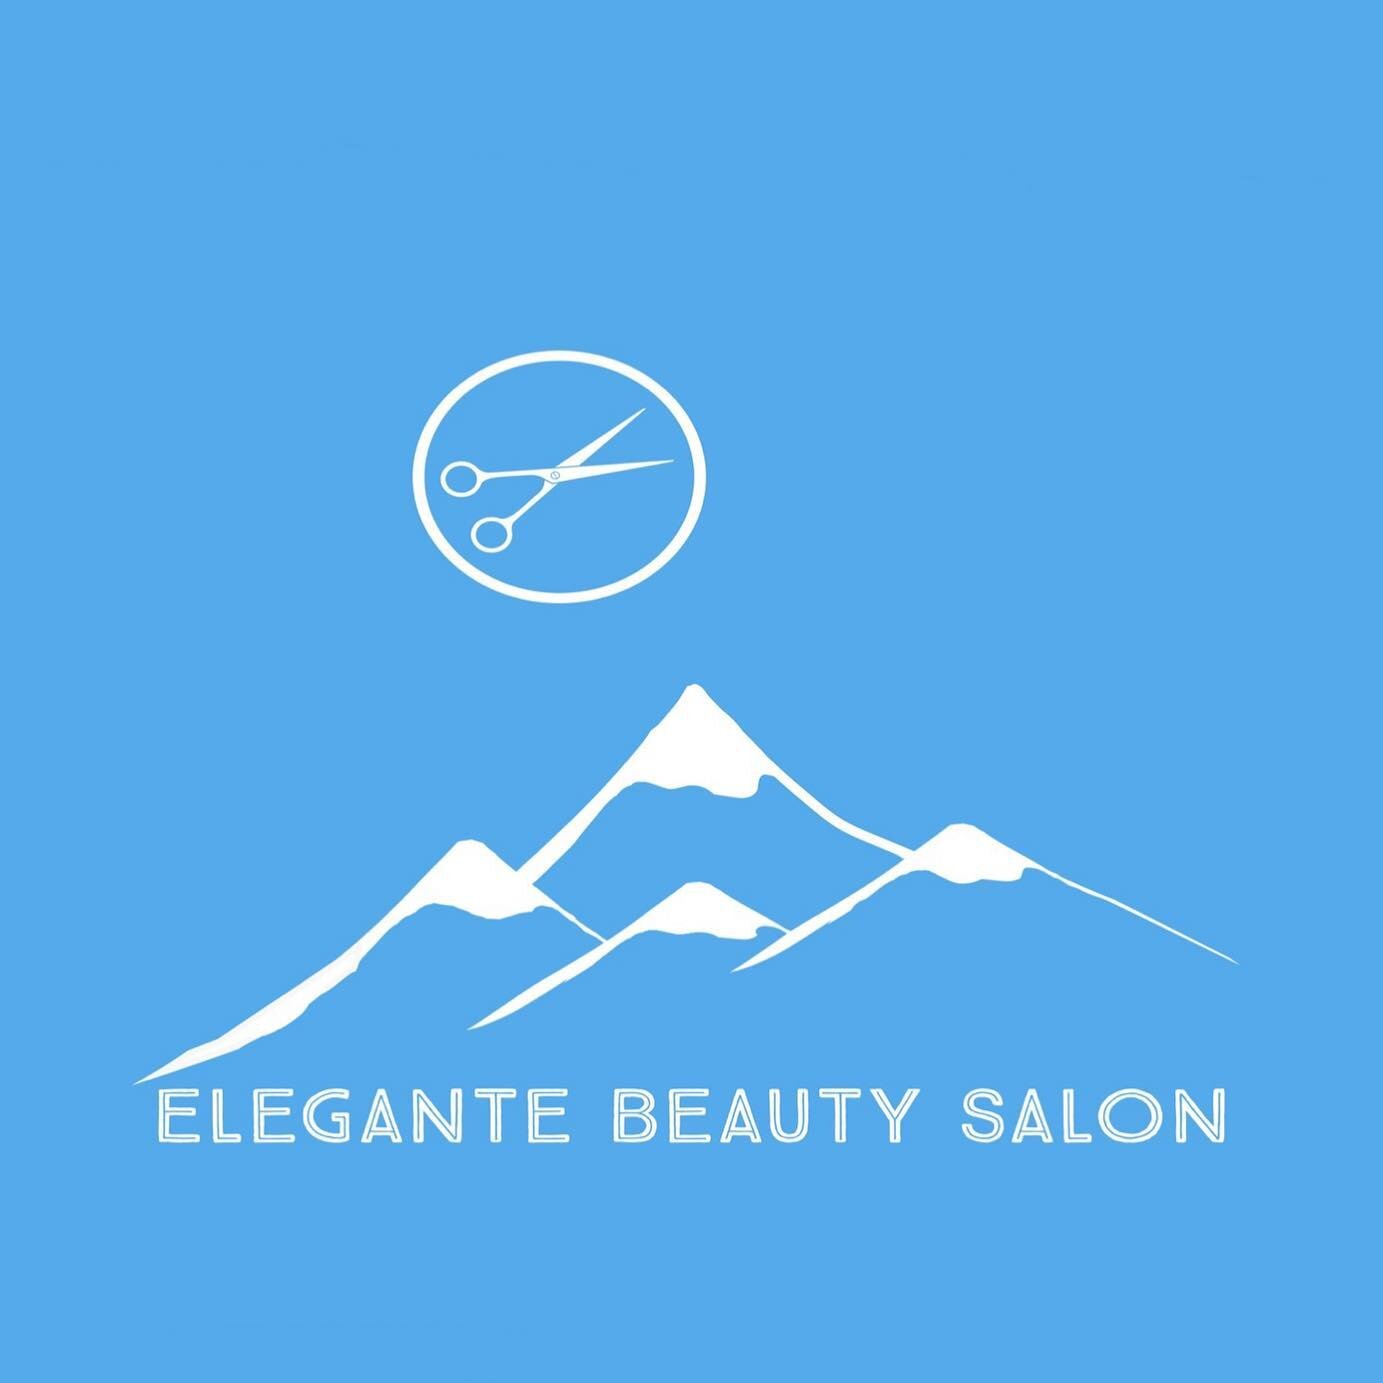 Elegante Beauty Salon focuses on bringing you a great experience by bringing you the services we offer. We offer services for all your beauty needs . Contact us today to see the many other ways we can help you . ✂️🏔

Elegante Beauty Salon se enfoca 